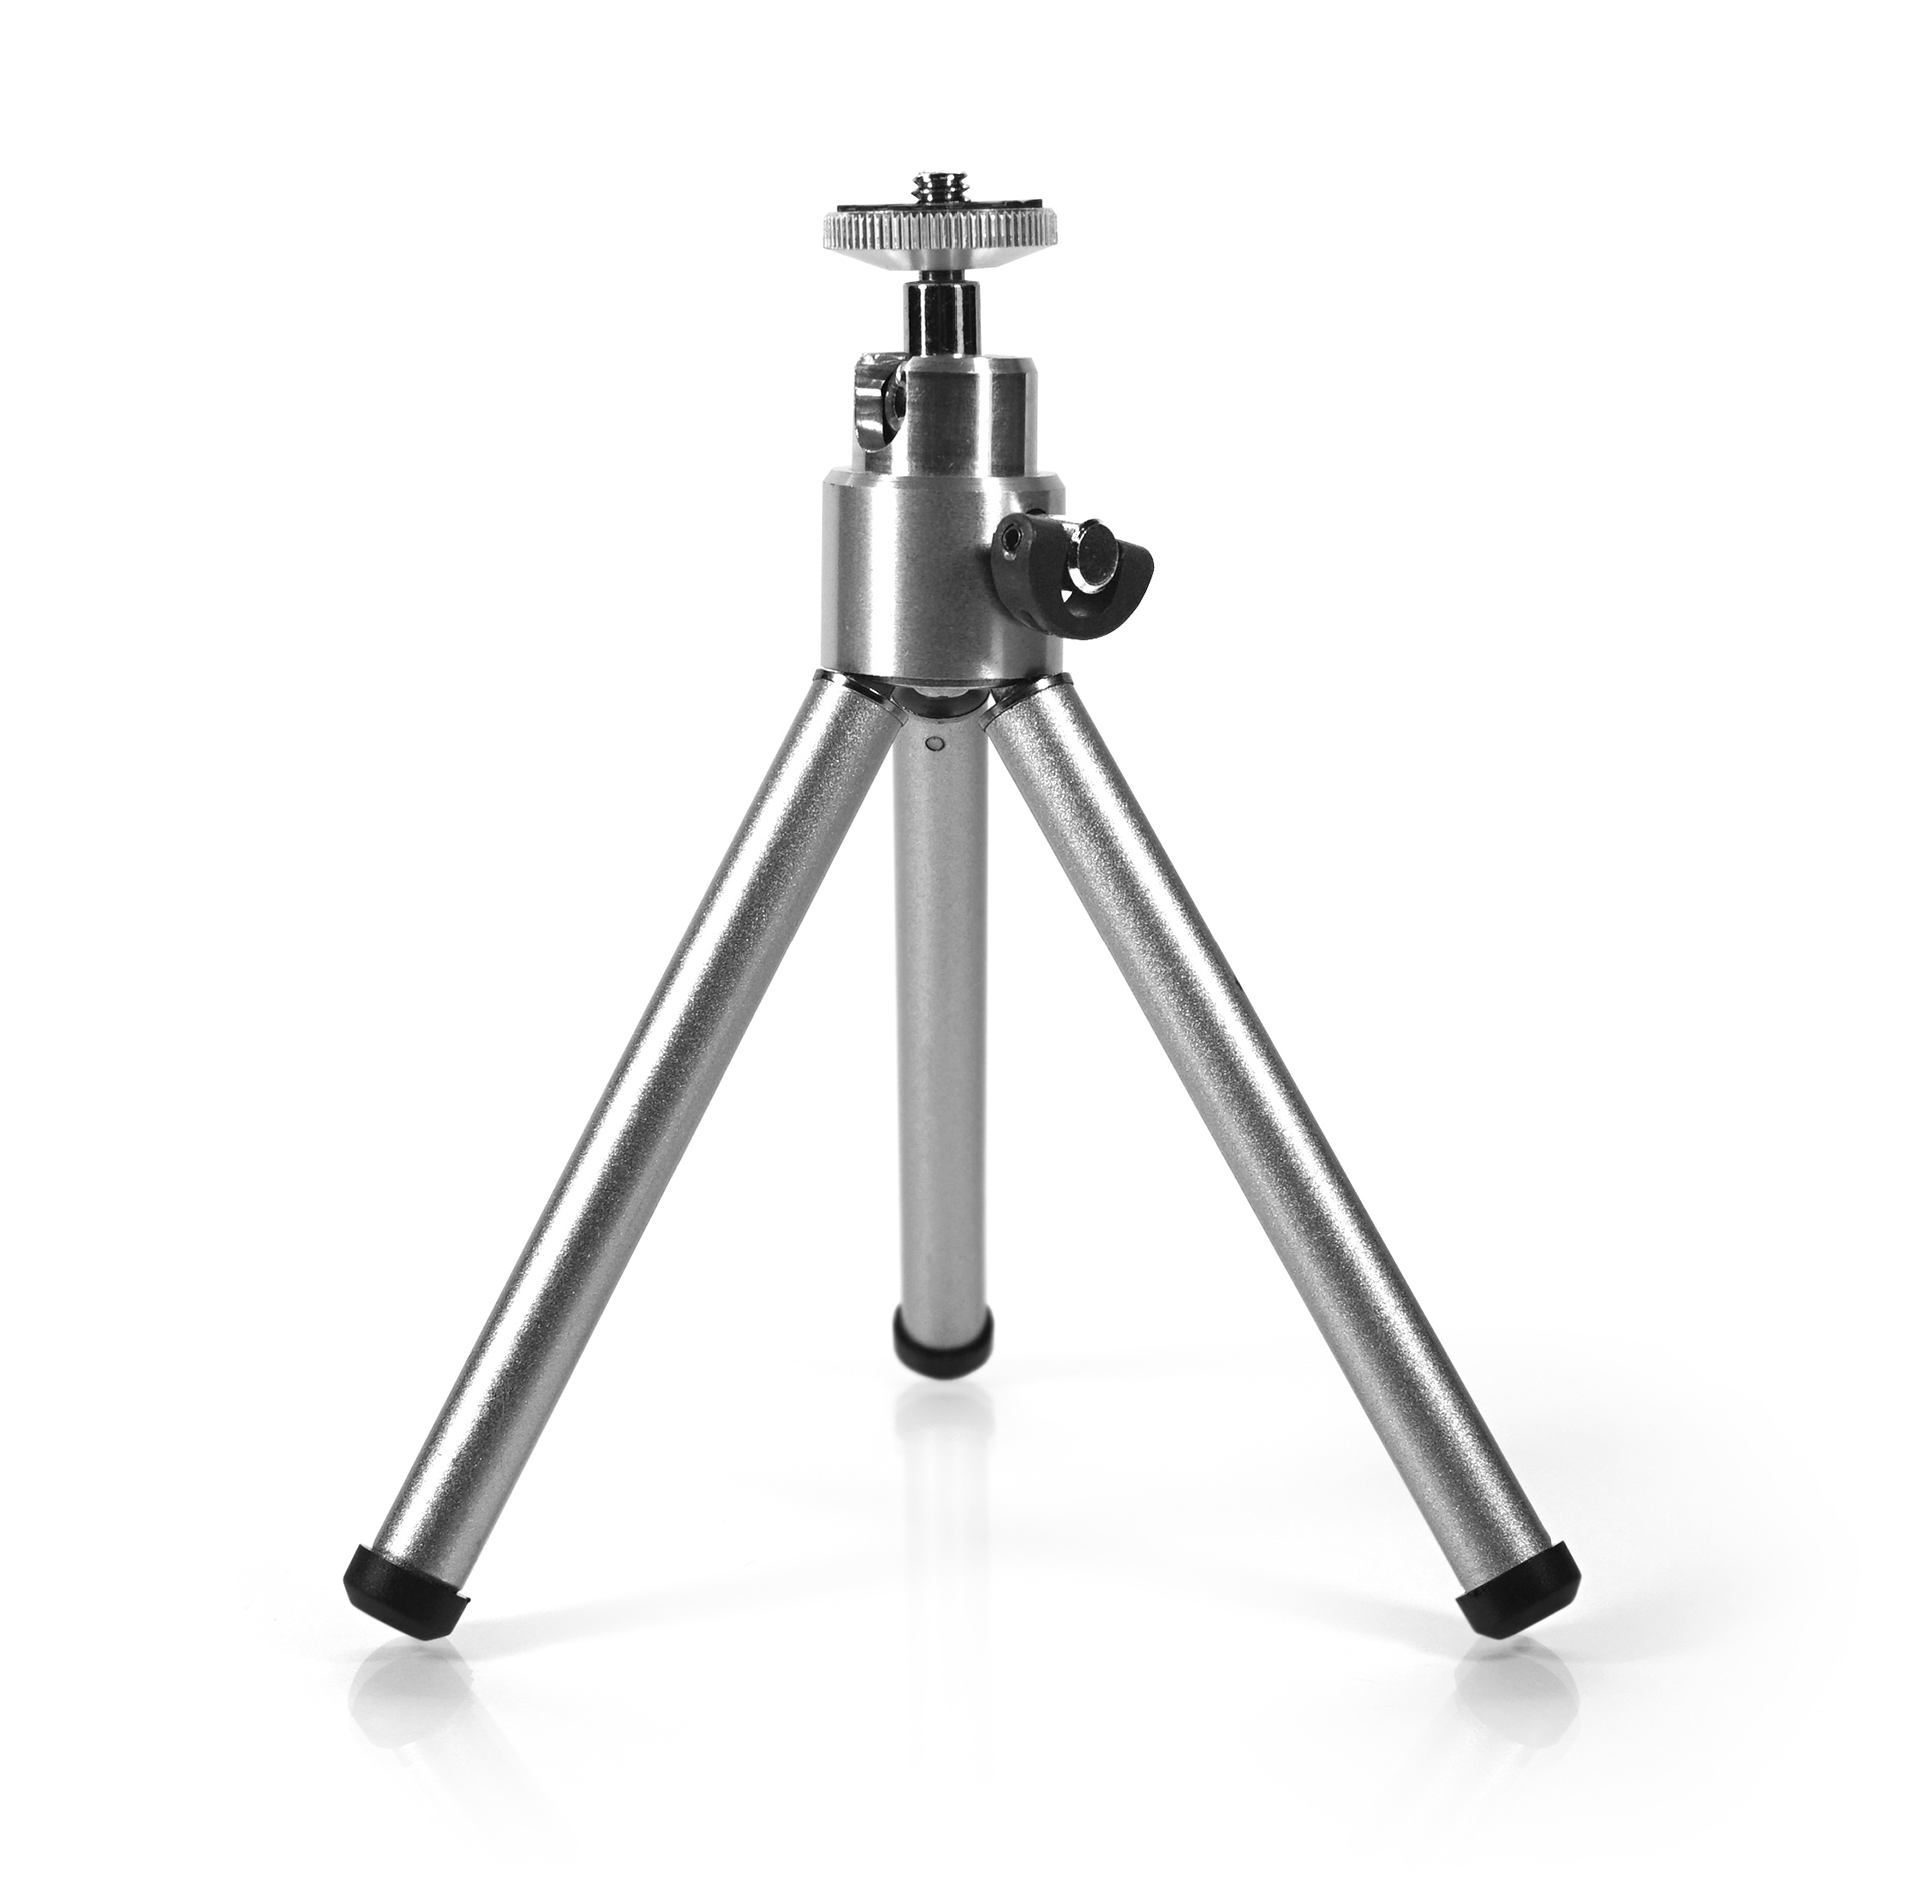 3 Powerful Ways To Get More Health And Fitness Clients Plus Precision Nutrition s Tripod